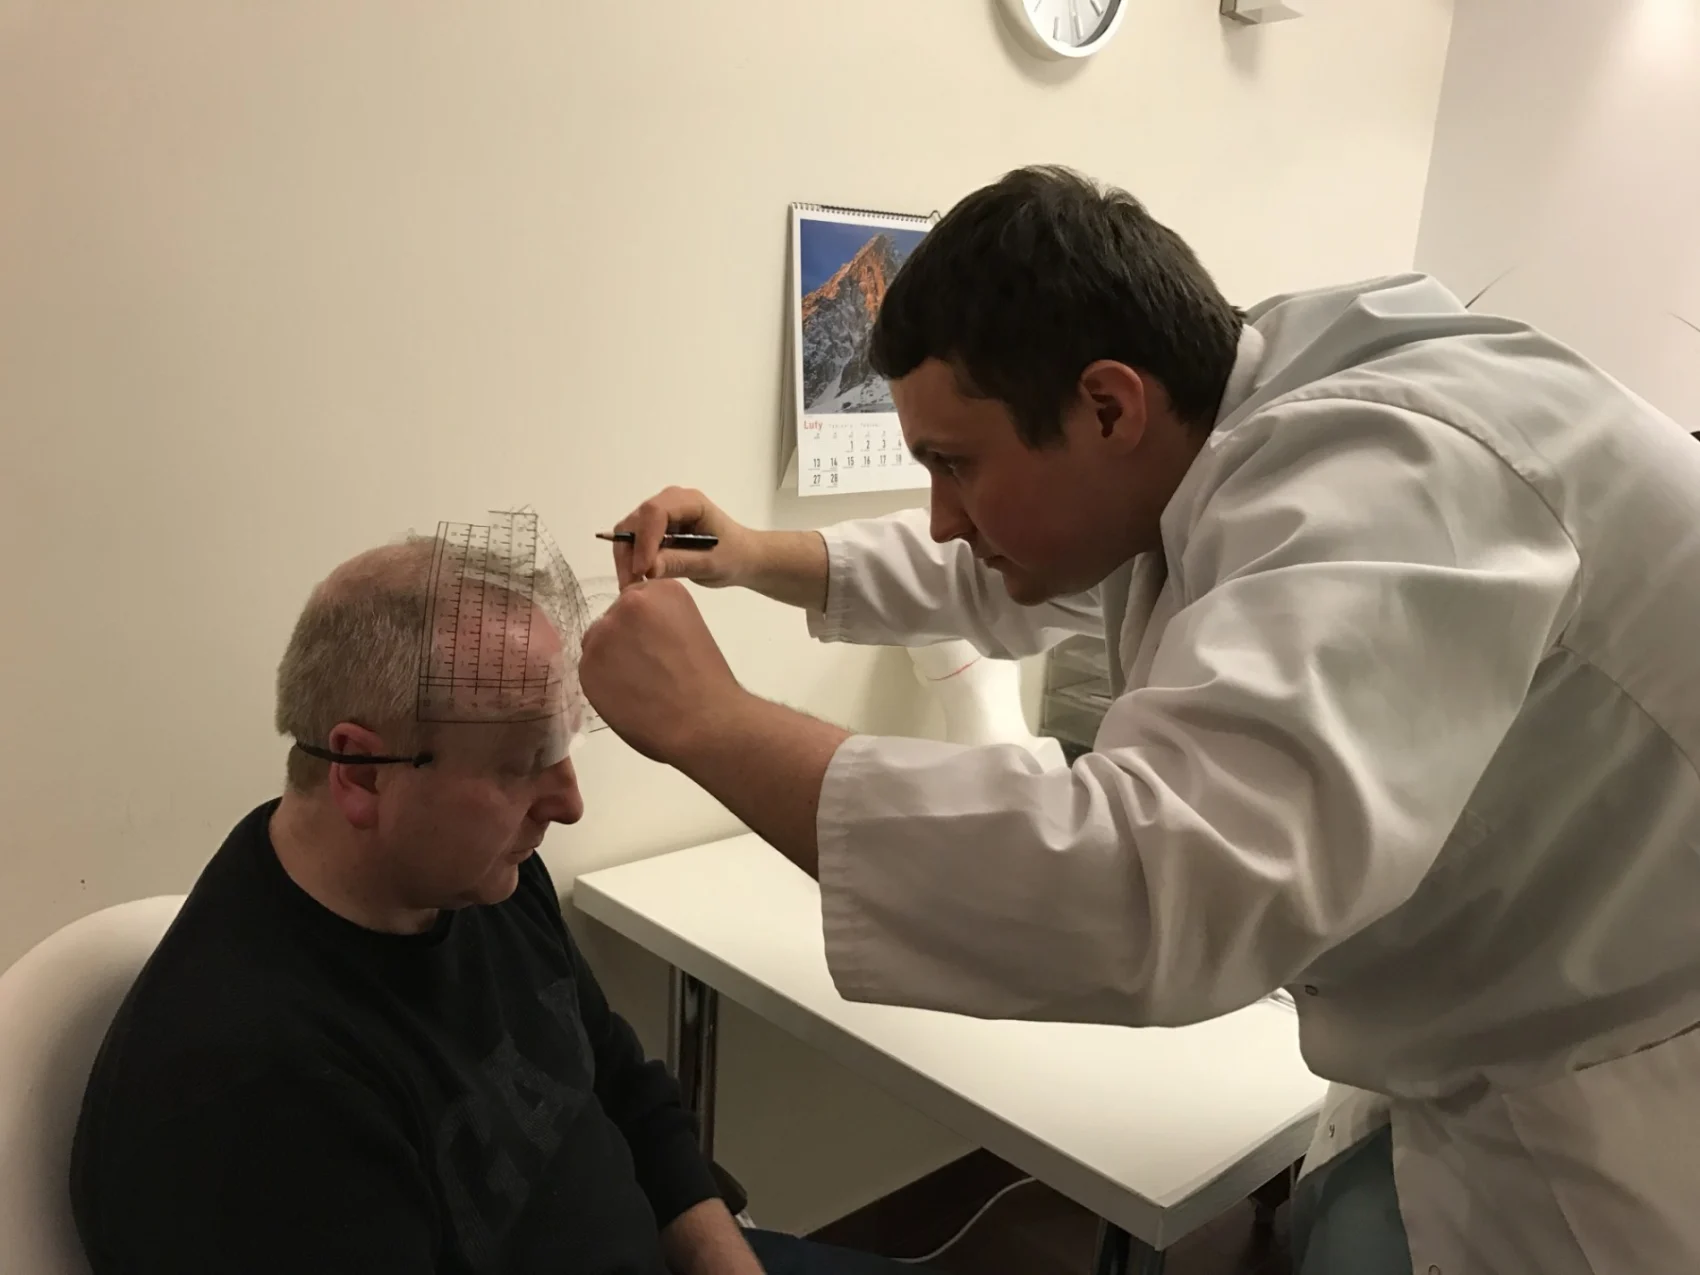 BannerImage_Eamon’s Hair Transplant Journey - Part III: After Treatment